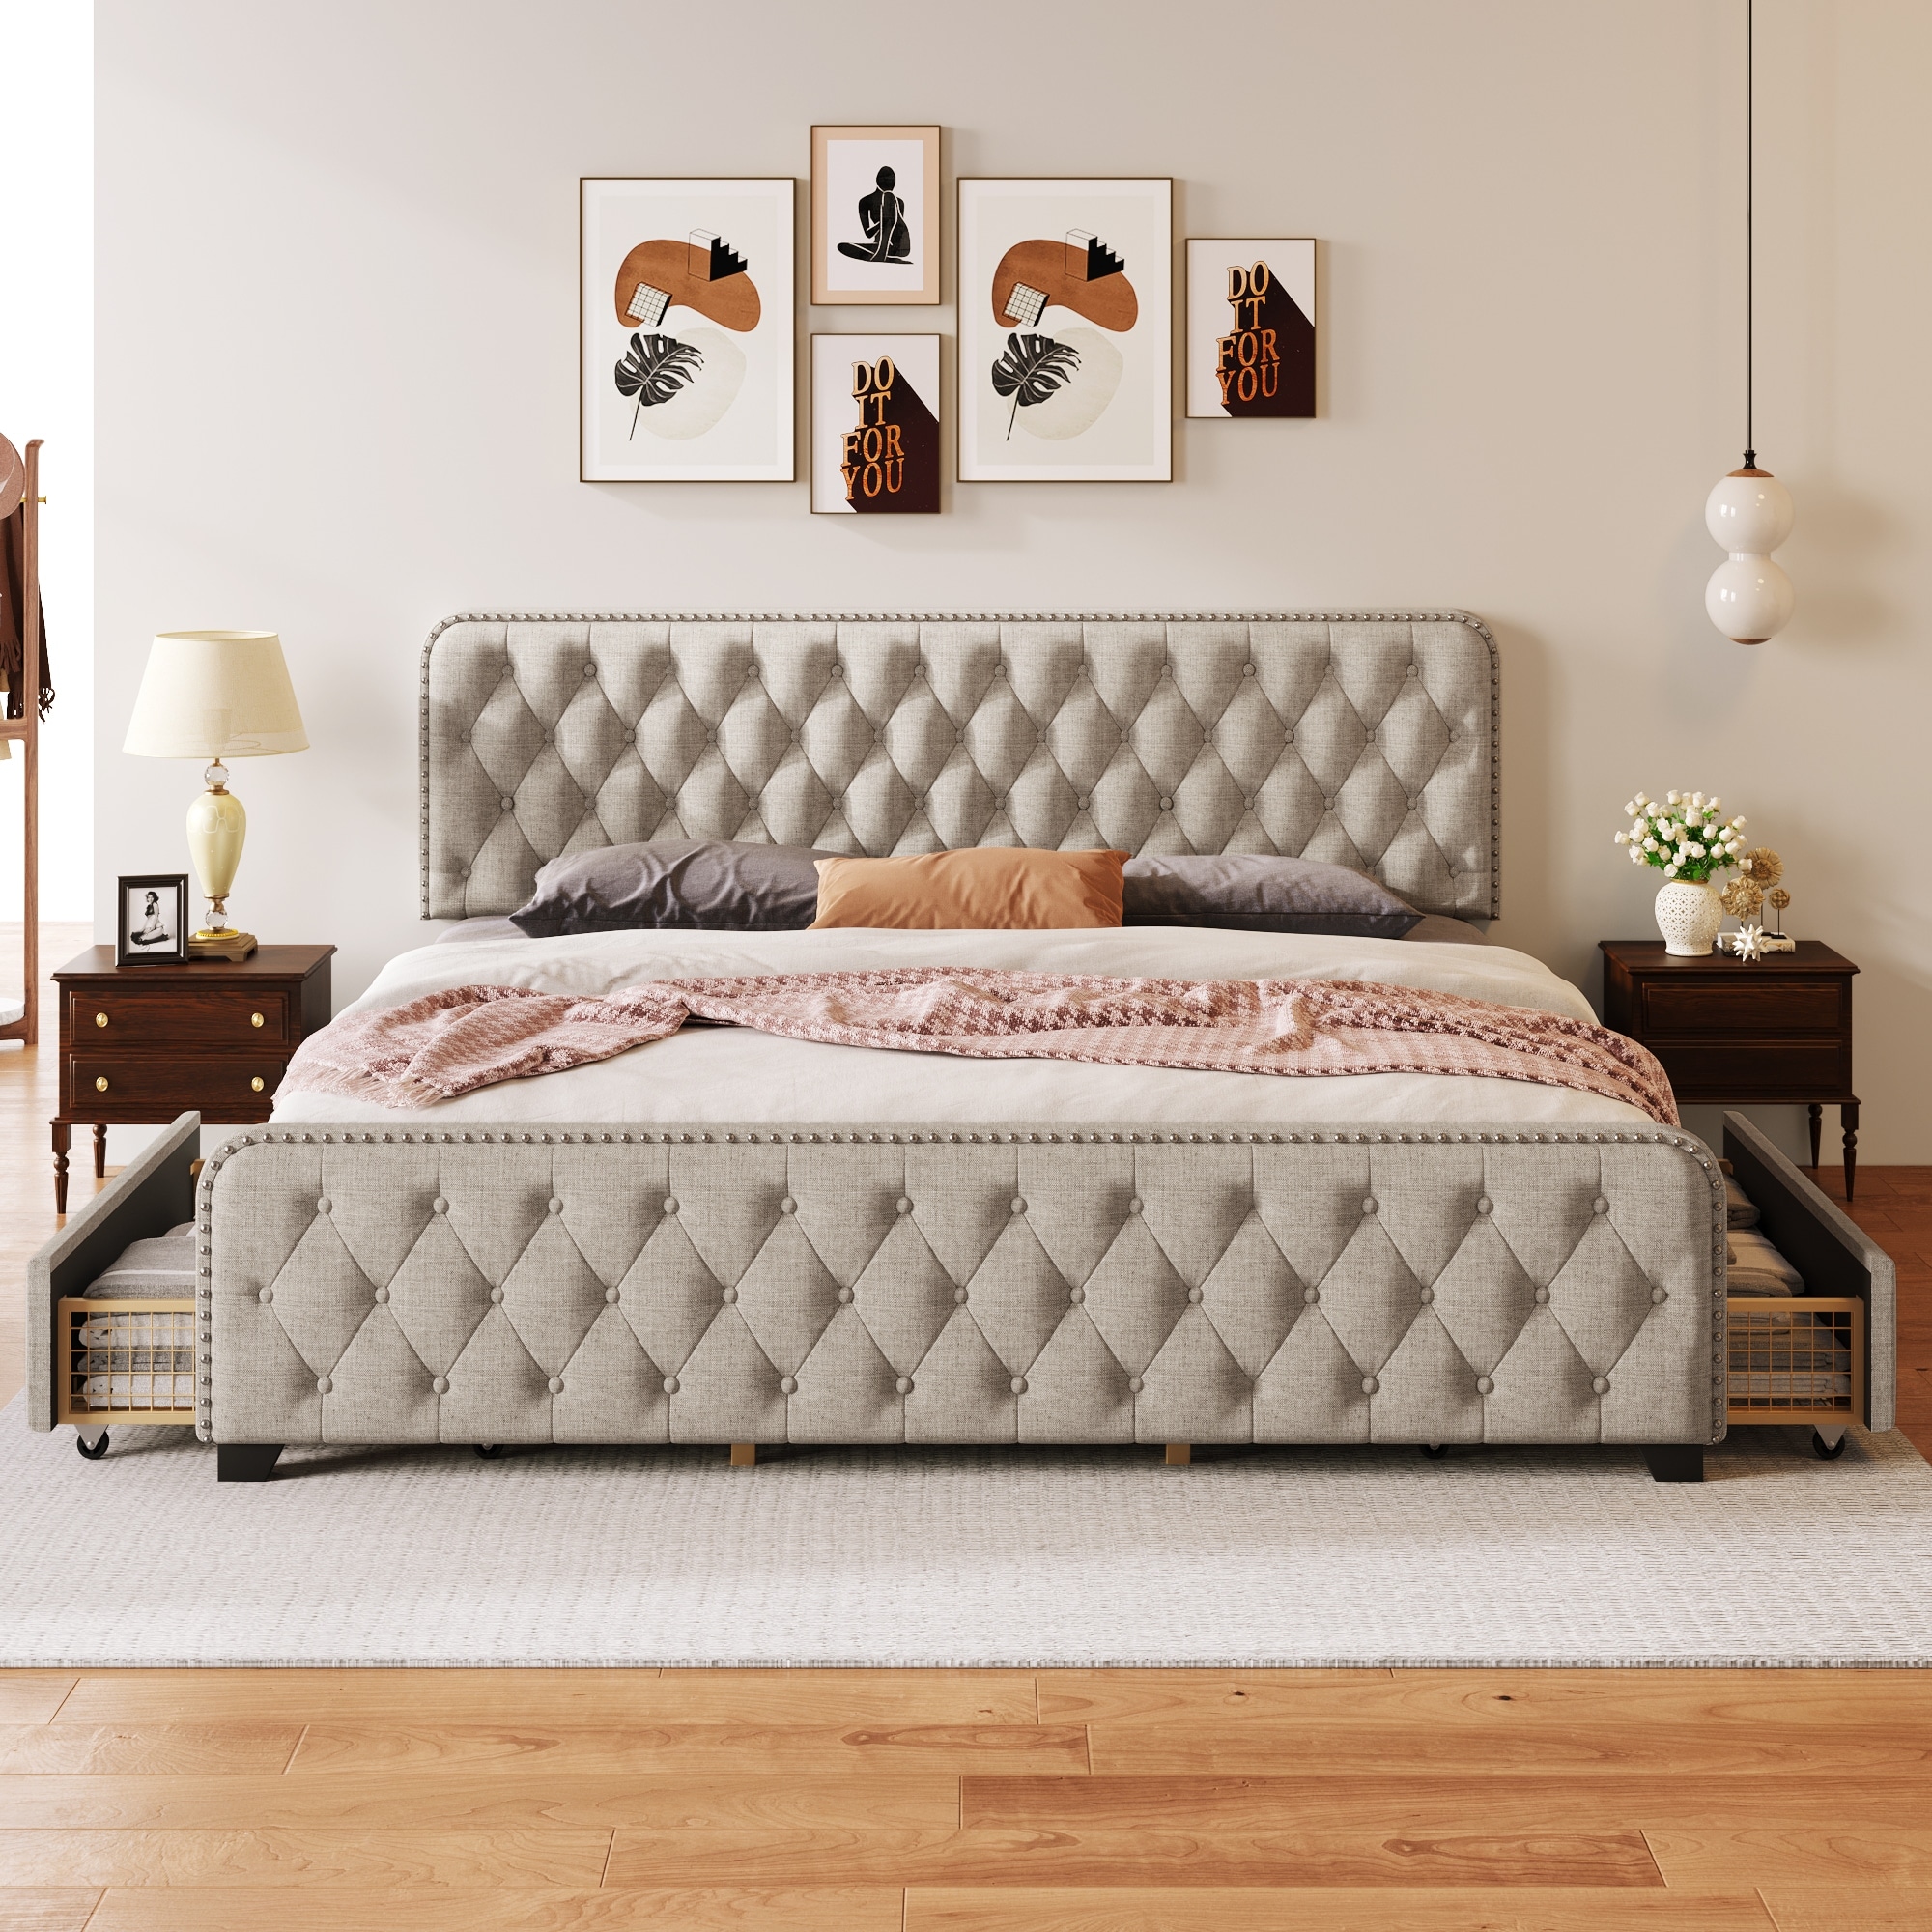 King Size Upholstered Platform Bed Frame With Four Drawers button Tufted Headboard And Footboard